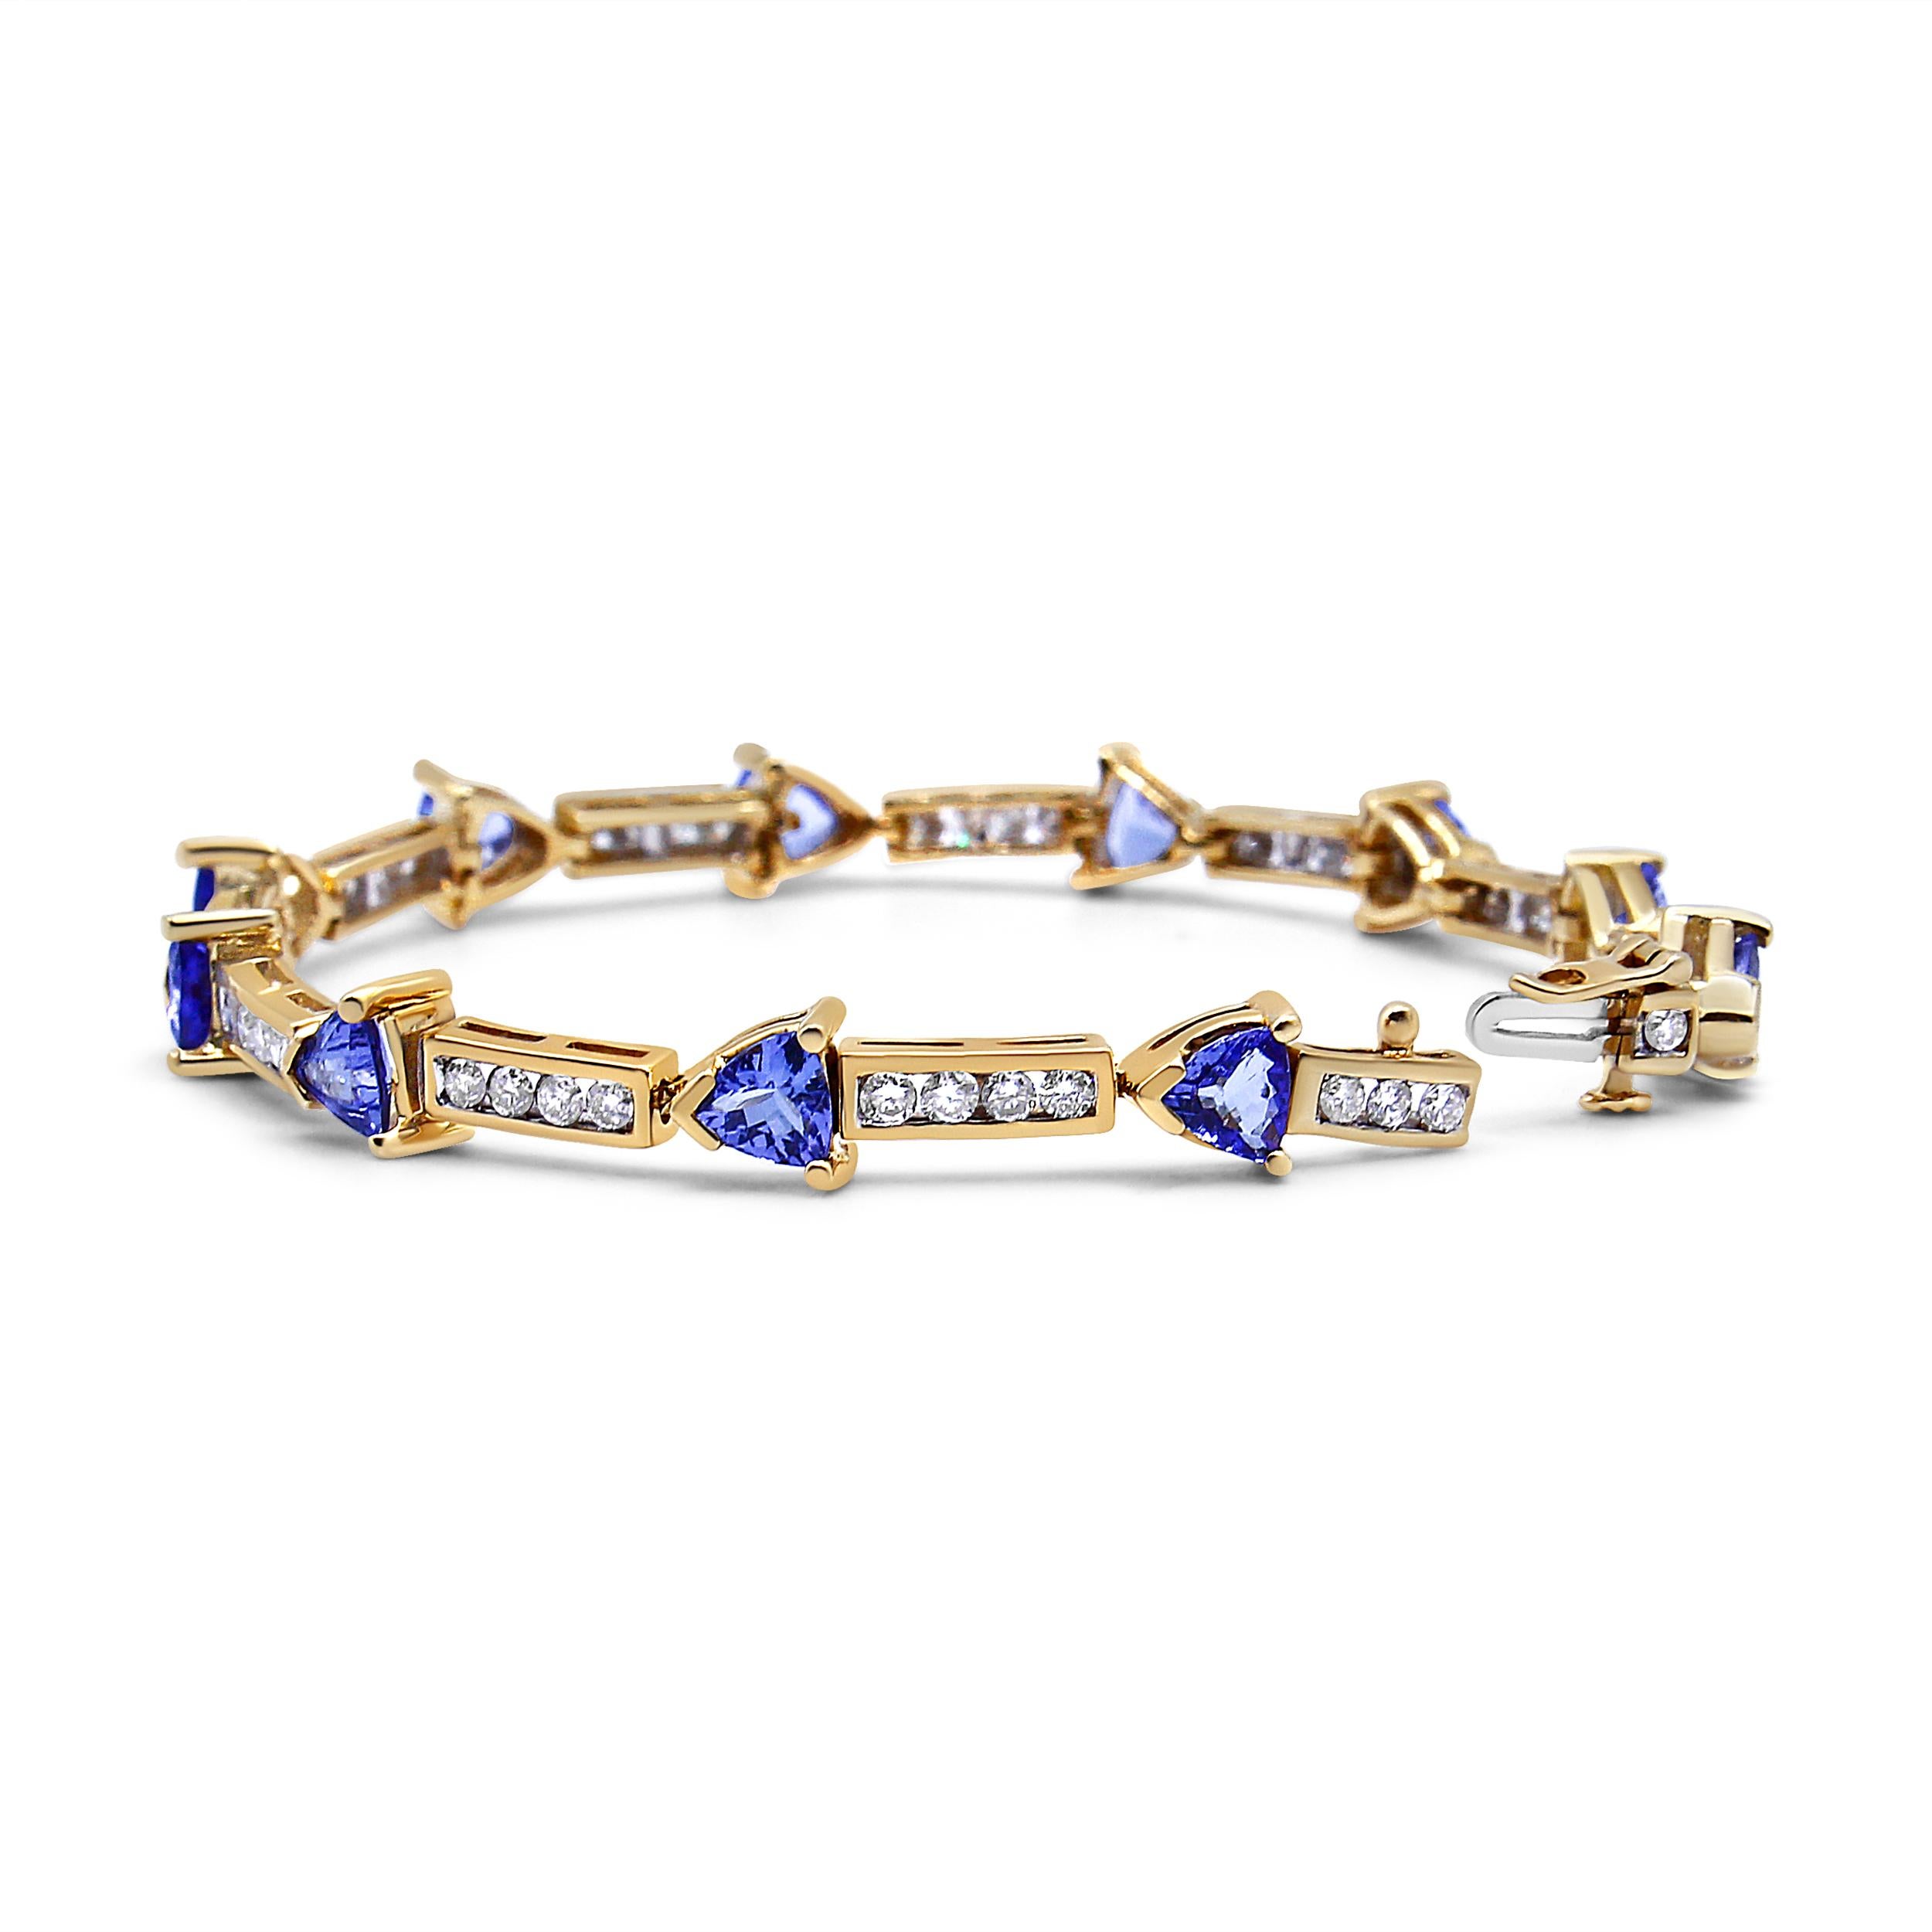 Express your style and sophistication with this alluring tanzanite and diamond link bracelet for her. Glistening 5mm trillion tanzanite gemstones alternate with beautiful 1 5/8 Cttw round diamonds in a signature pattern. Boasting an intricate design